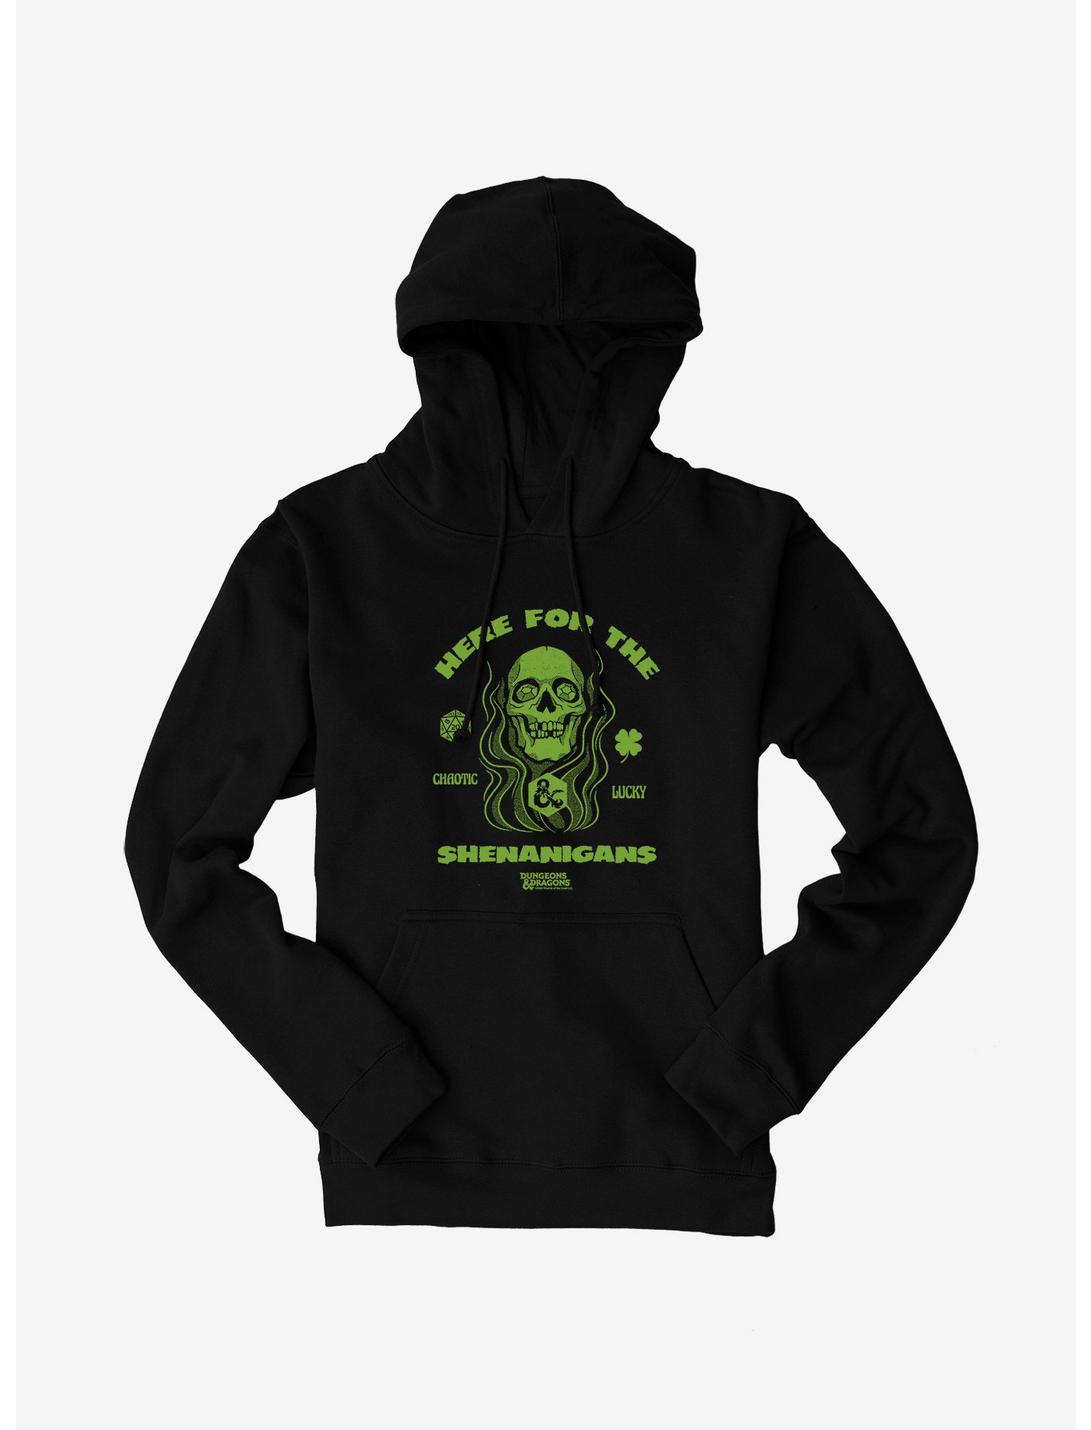 Dungeons & Dragons Here For The Shenanigans Skull Hoodie, BLACK, hi-res